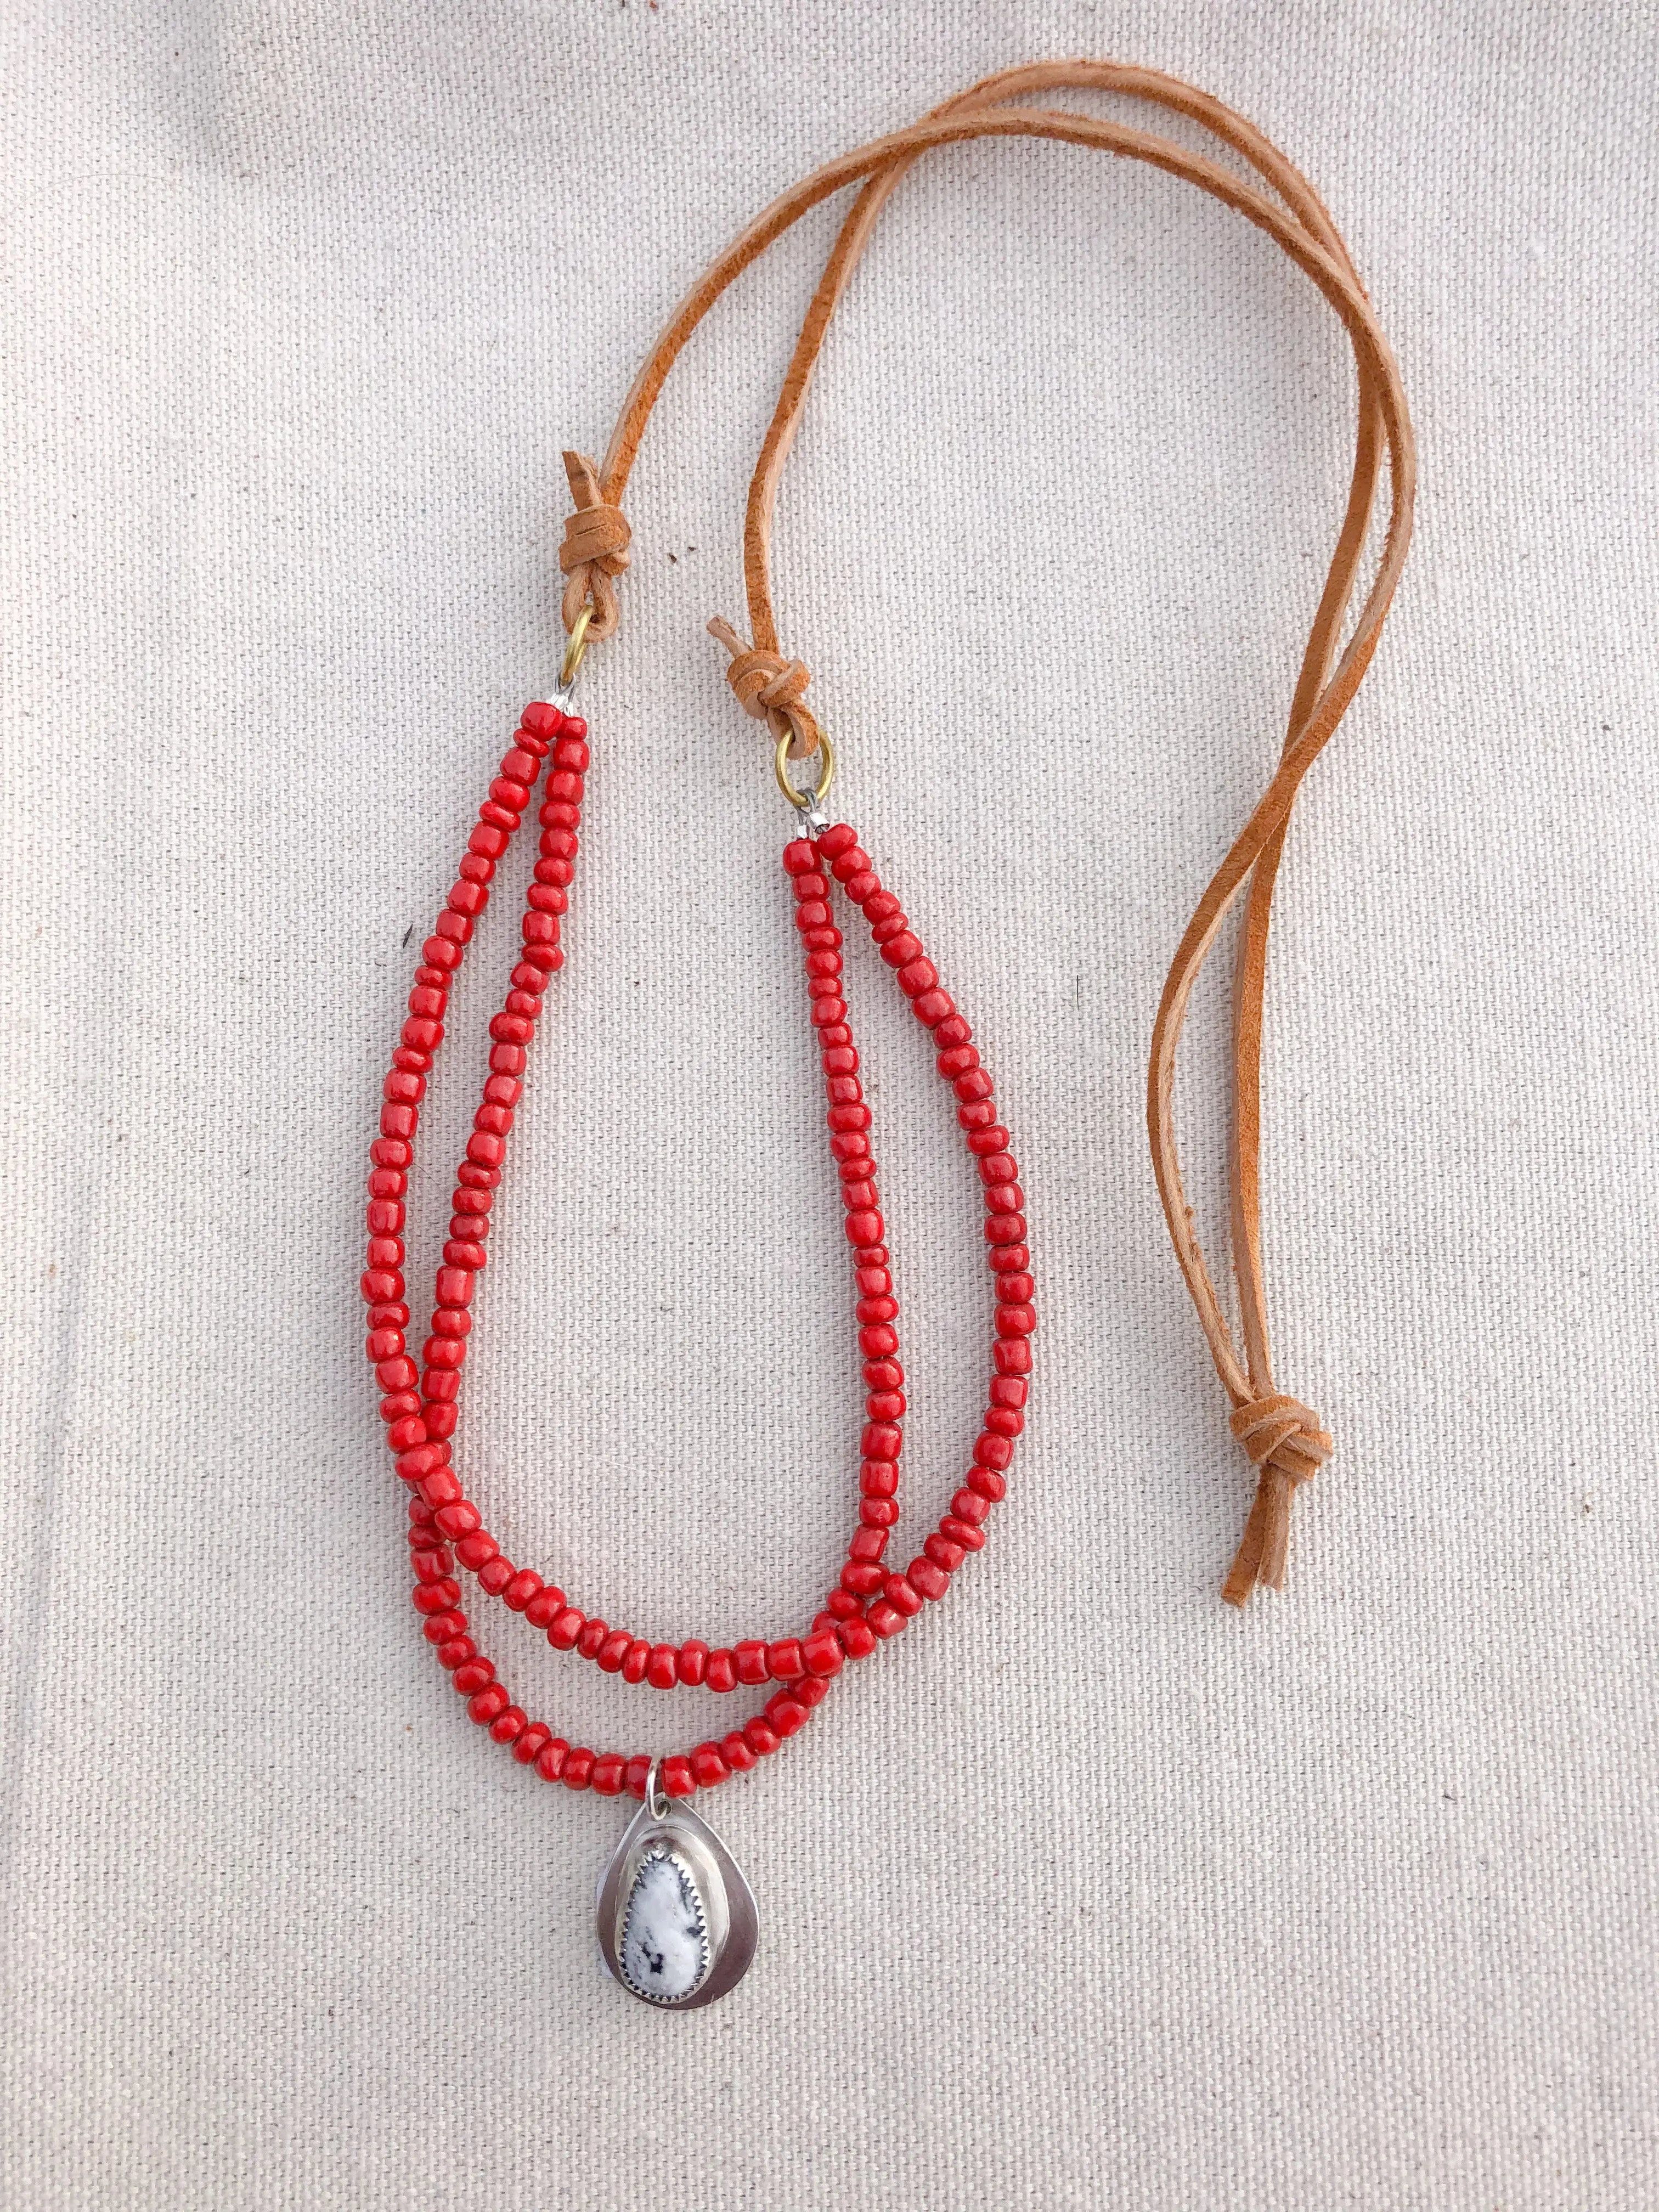 Buy Red and White Beaded Necklace Round,red Beads With Flat White Spacers.  Online in India - Etsy